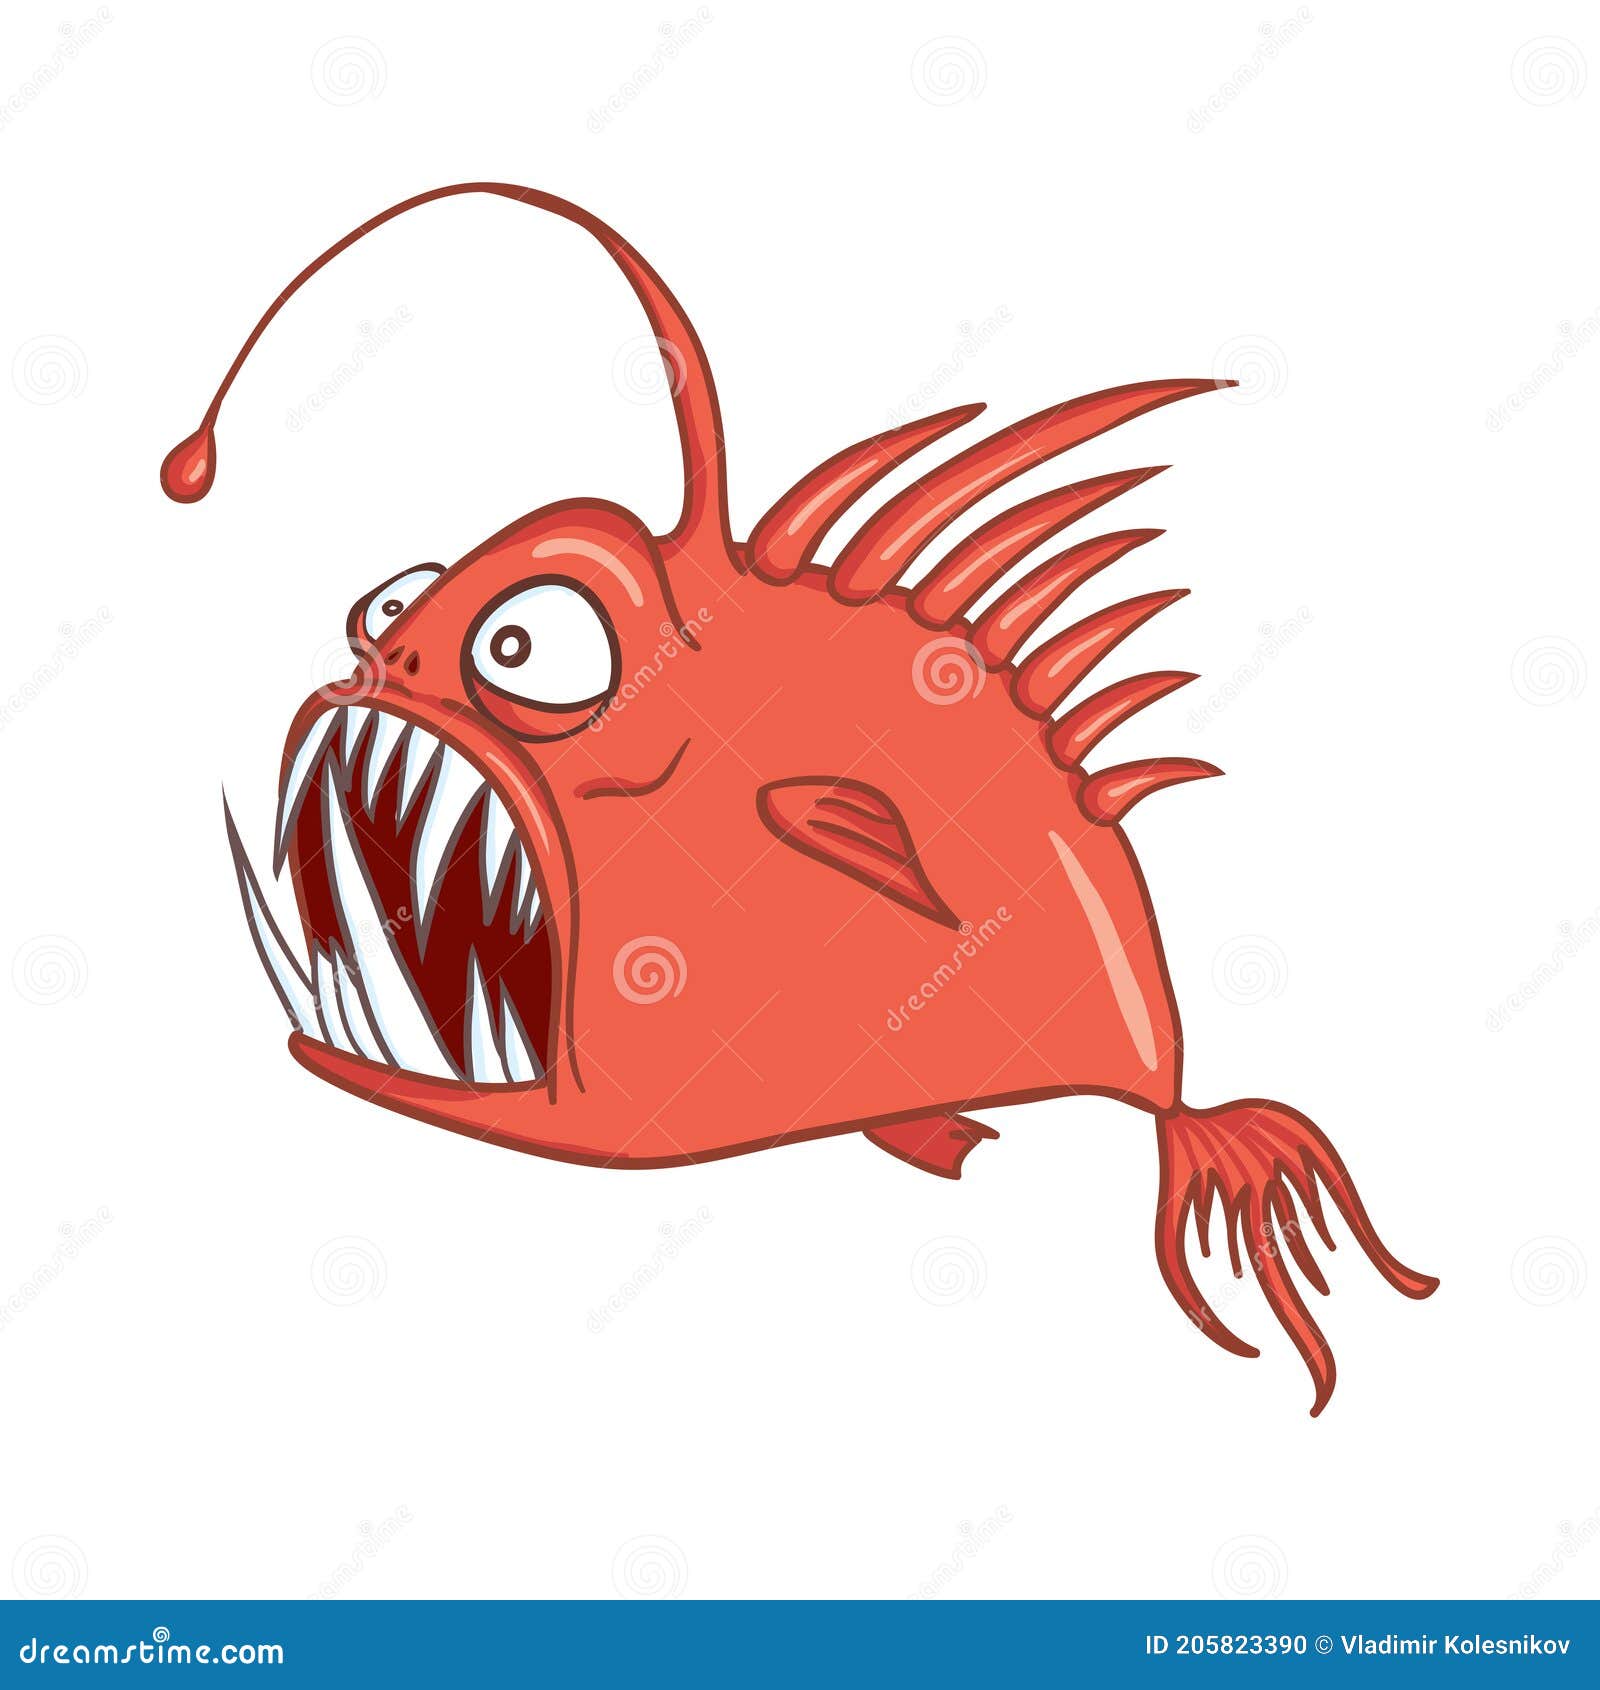 Digital Illustration of a Scary Red Angler Fish Stock Vector